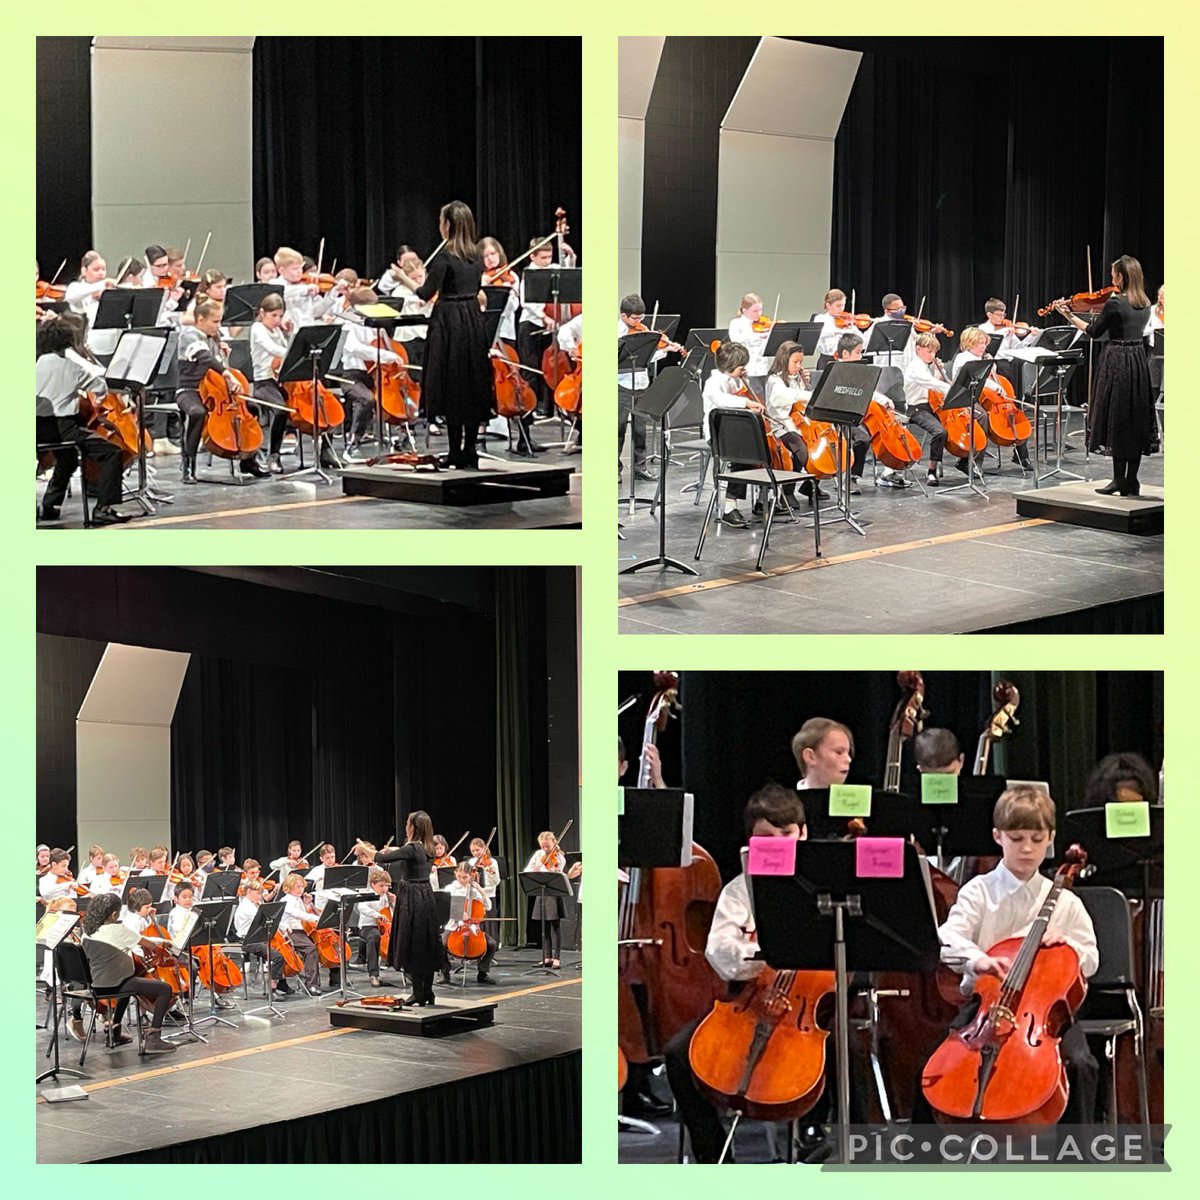 Just an awesome evening getting to hear the 4th & 5th grade orchestras @ their winter concert. They played beautifully - so proud of these rockstar Ss! #beproudbedale #medfieldps #greatsounds